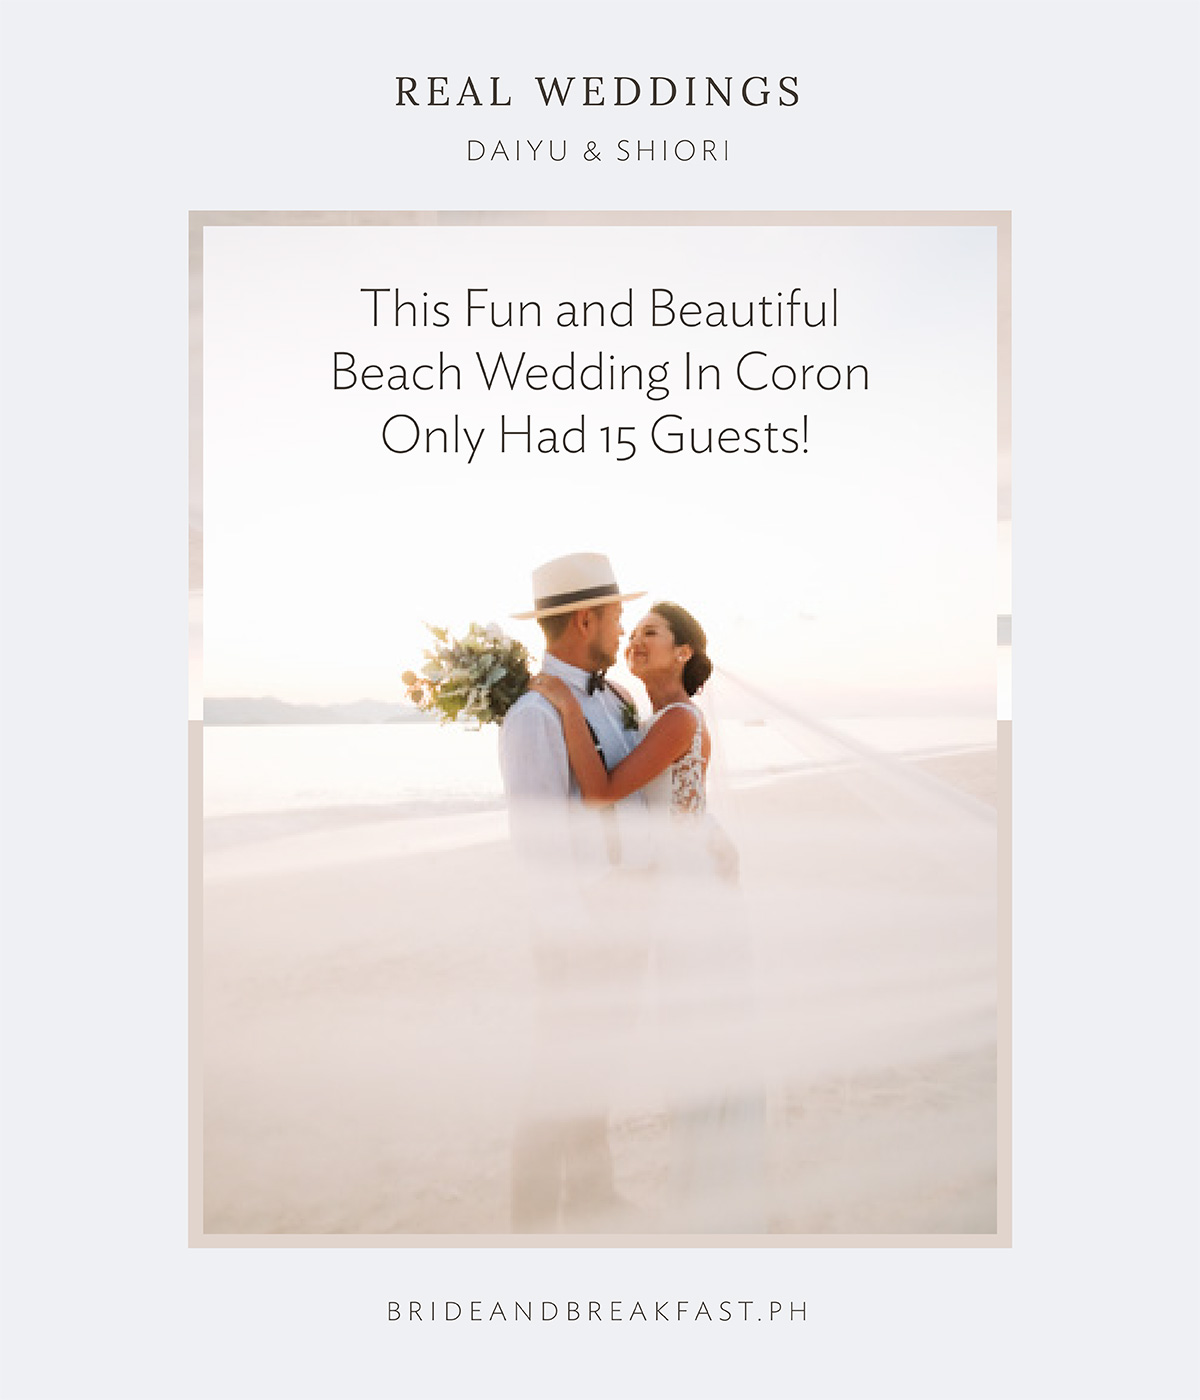 This Fun and Beautiful Beach Wedding in Coron Only had 15 Guests!